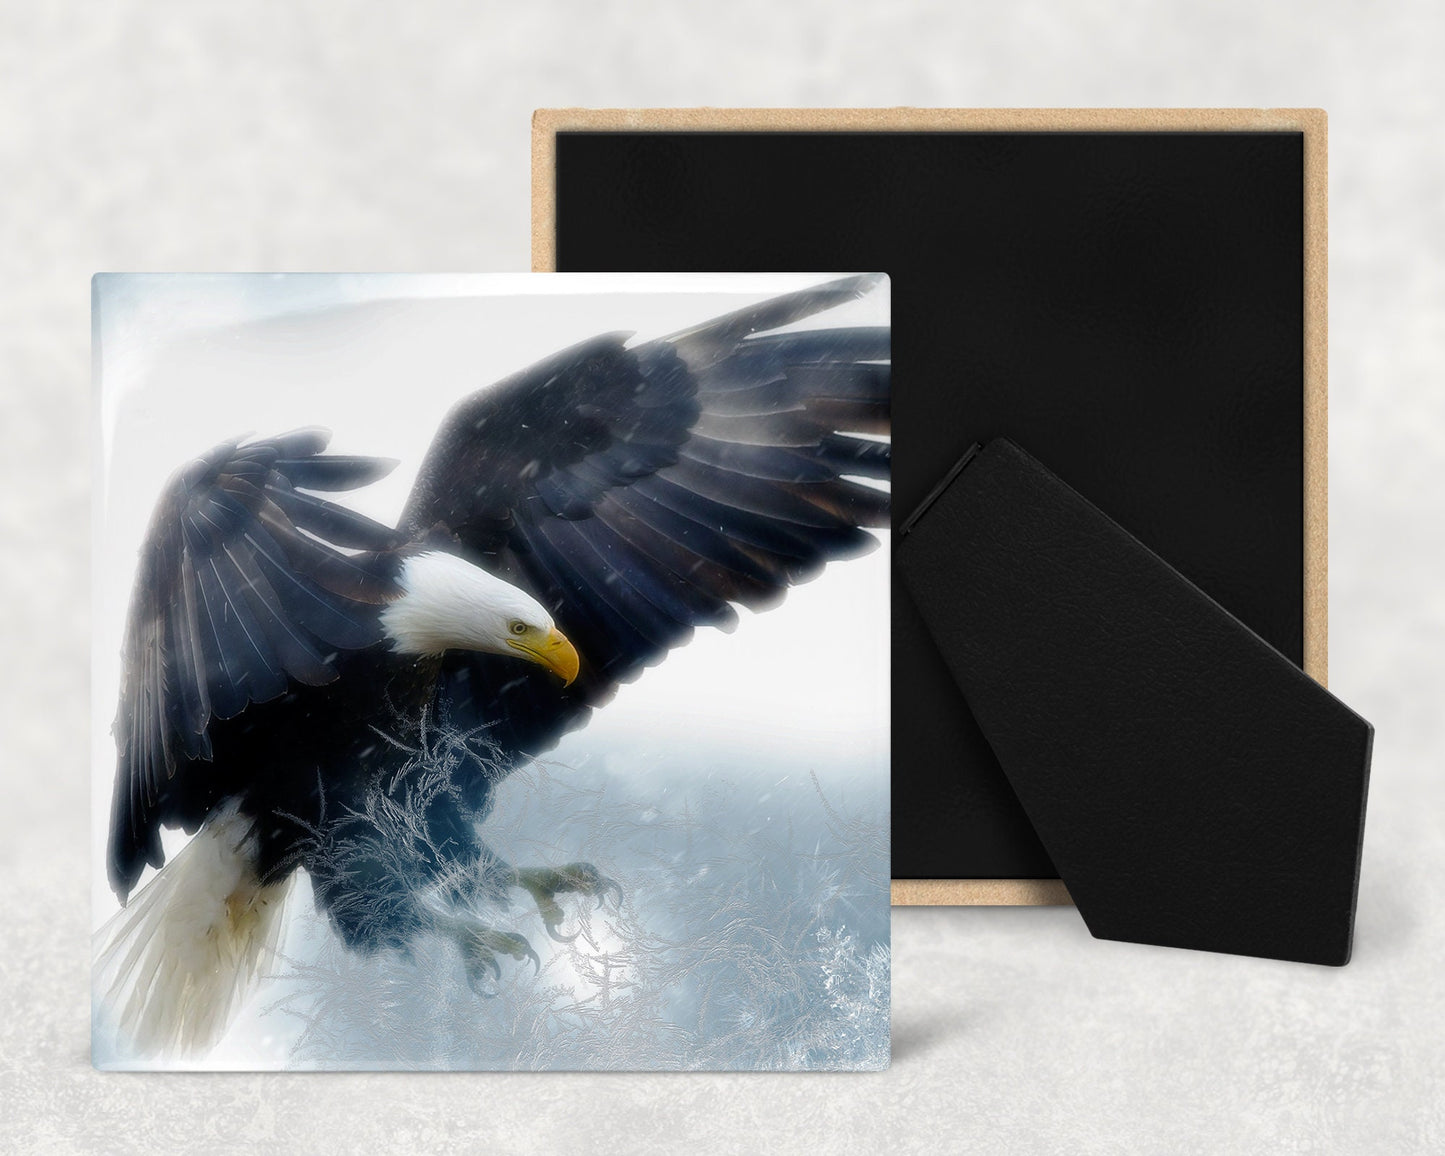 Bald Eagle in Flight Art Decorative Ceramic Tile with Optional Easel Back - Available in 3 Sizes